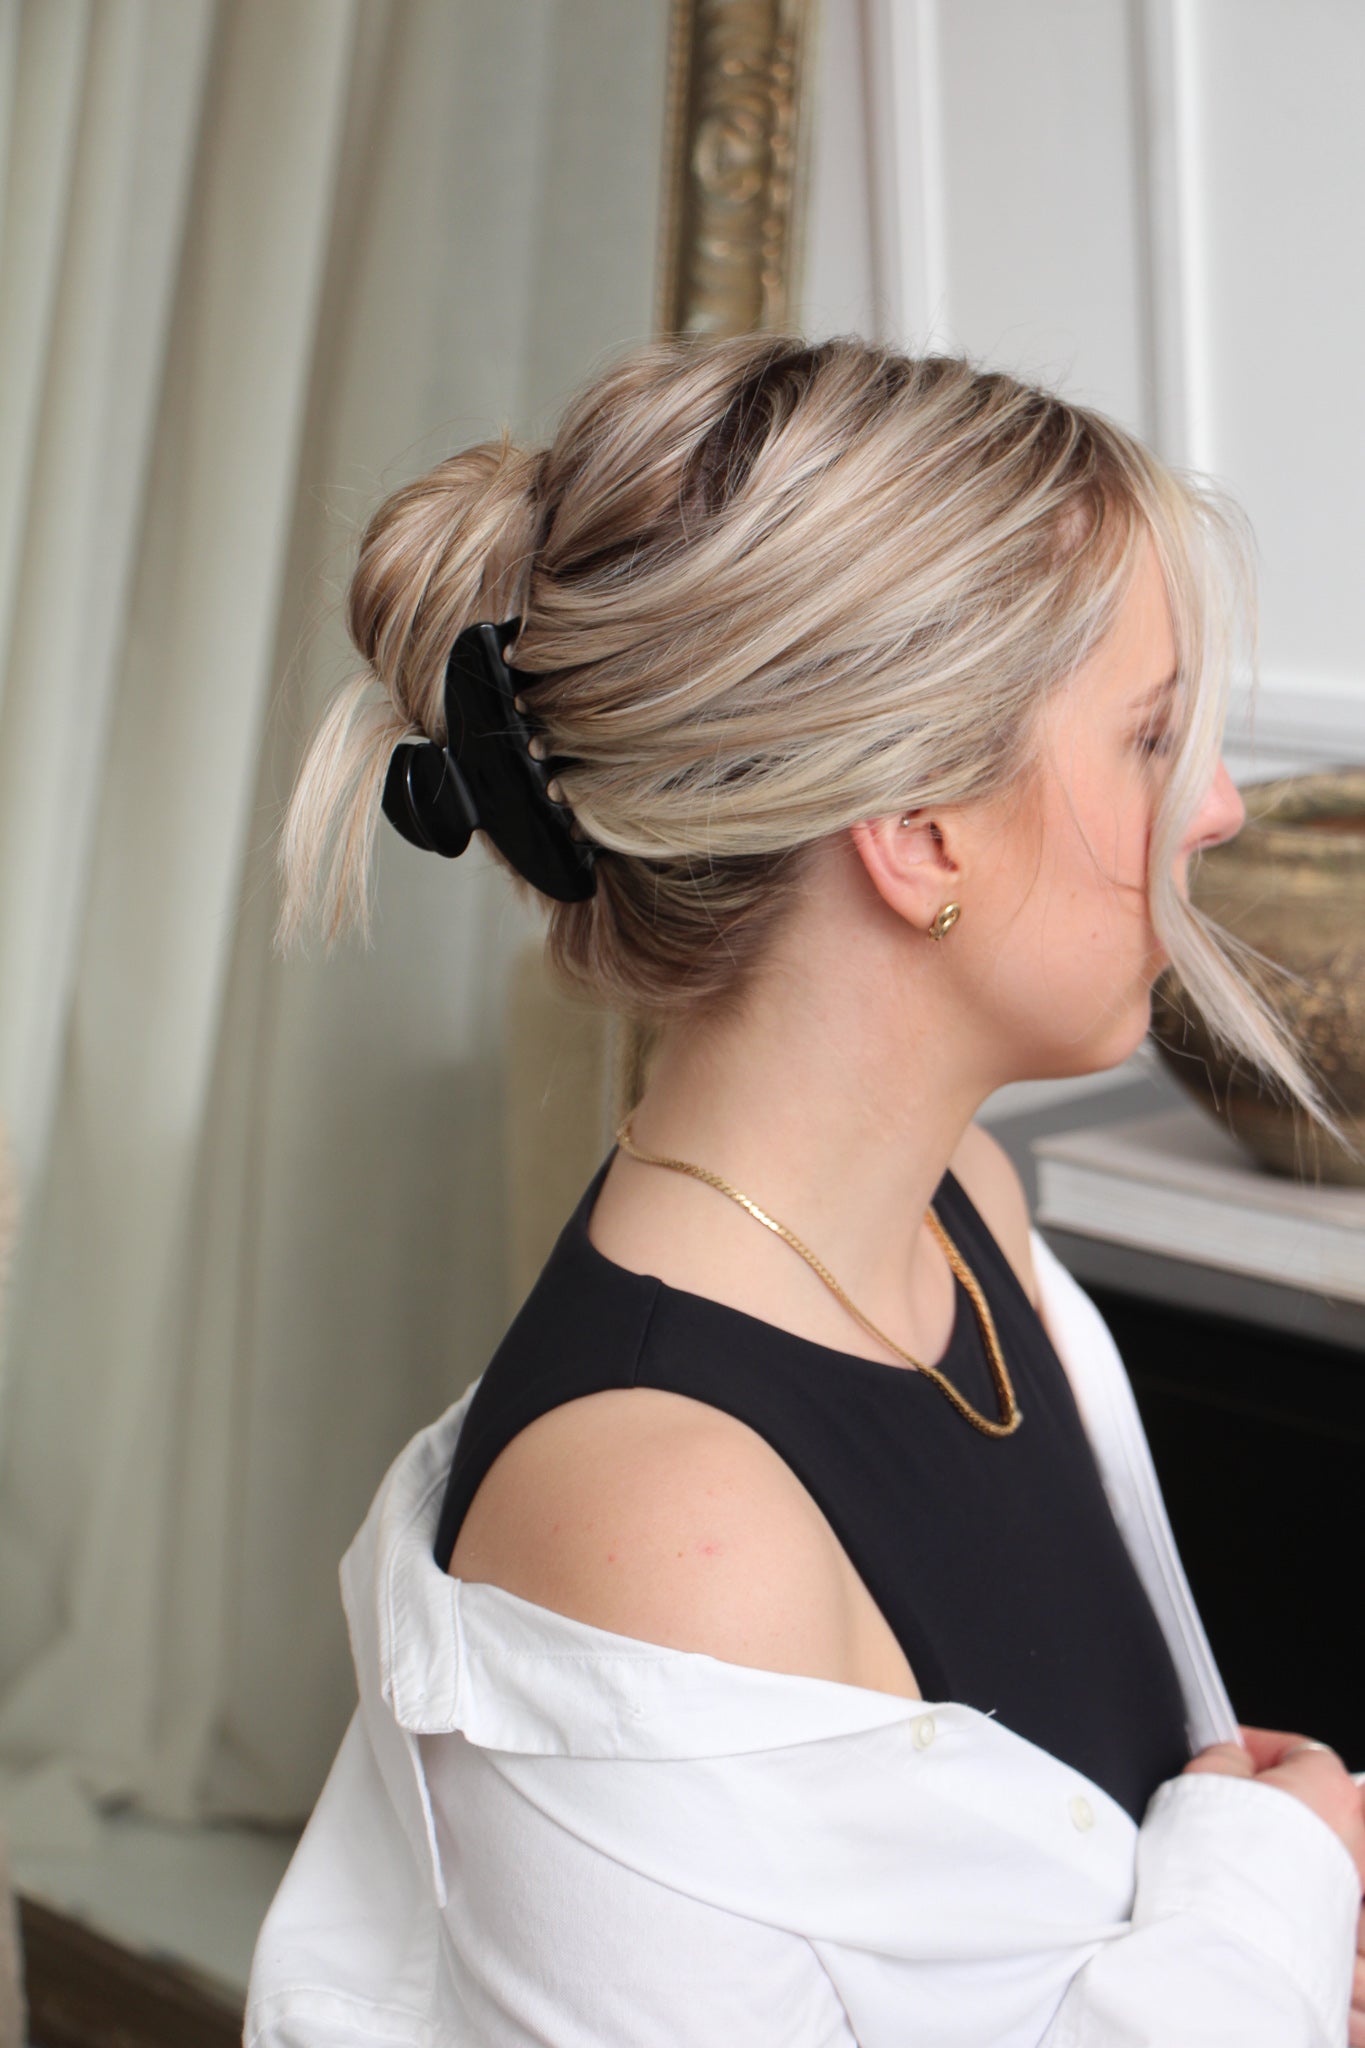 Black claw hair clip in model's blond hair. Model is wearing black tank with a white dress shirt over the shoulders. 